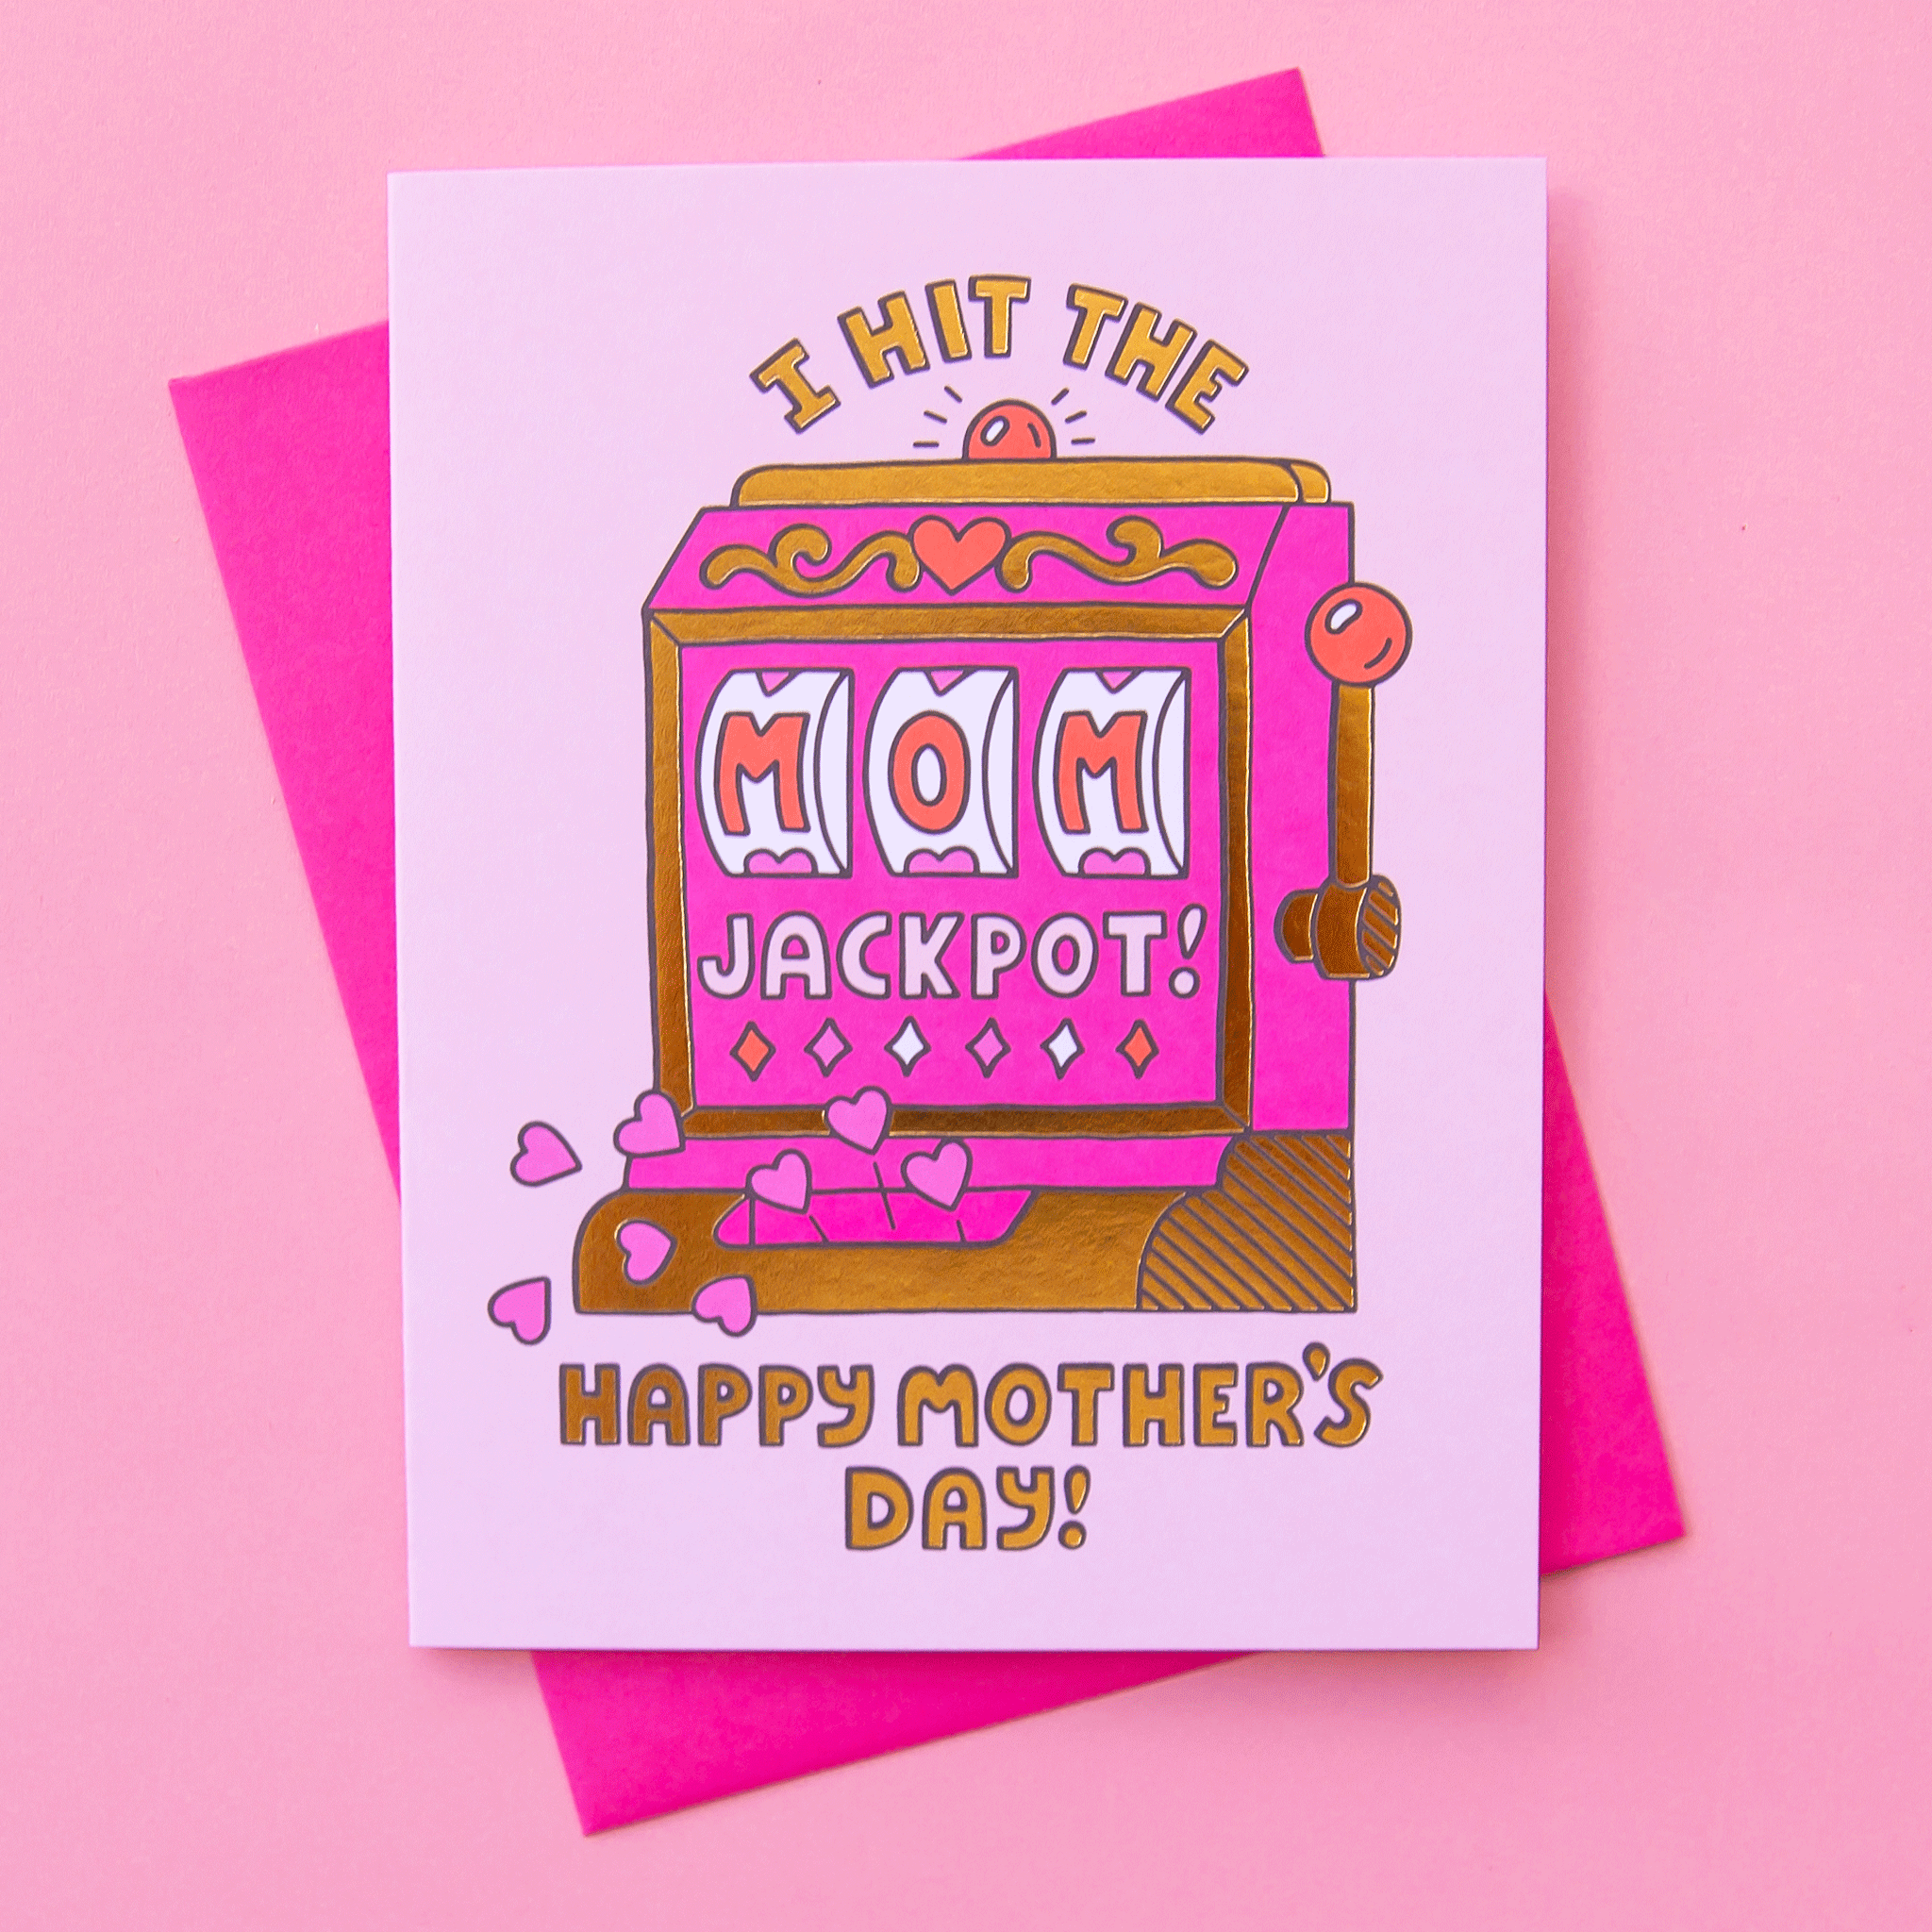 On a pink background is a white card with a pink and gold slot machine that&#39;s detailed with hearts and reads, &quot;I hit the MOM jackpot! Happy Father&#39;s Day!&quot;. &quot;MOM&quot; is written in the slot machine as the winning numbers. Also included is a coordinating white envelope.